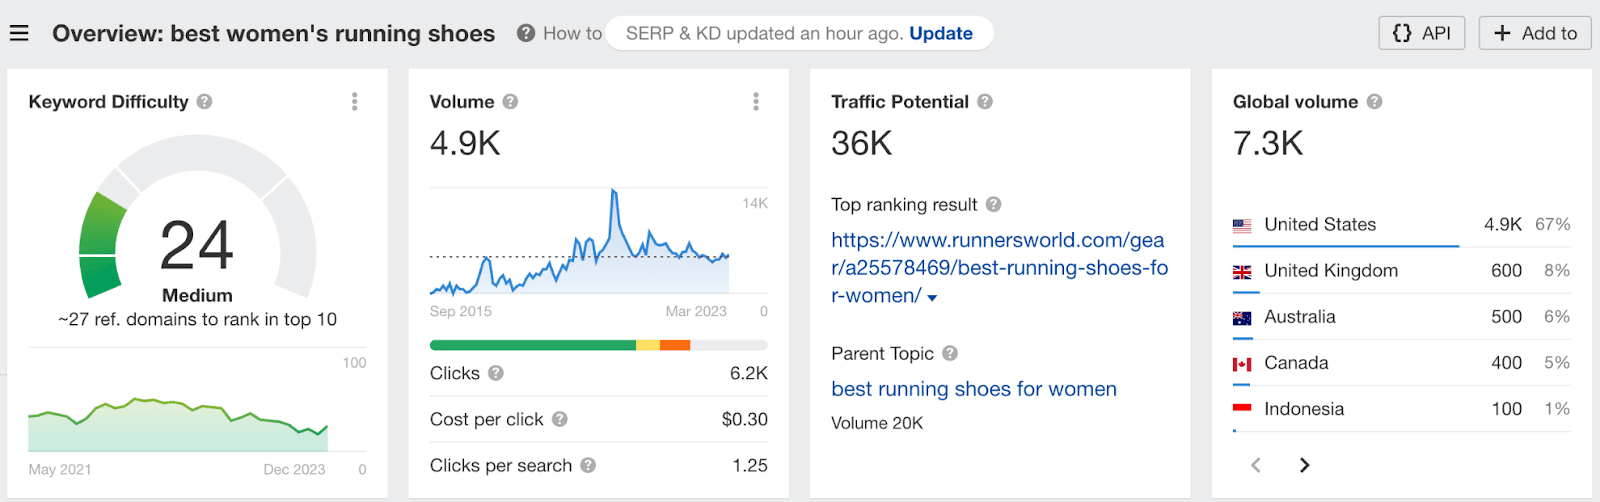 overview of keywords for best women's running shoes